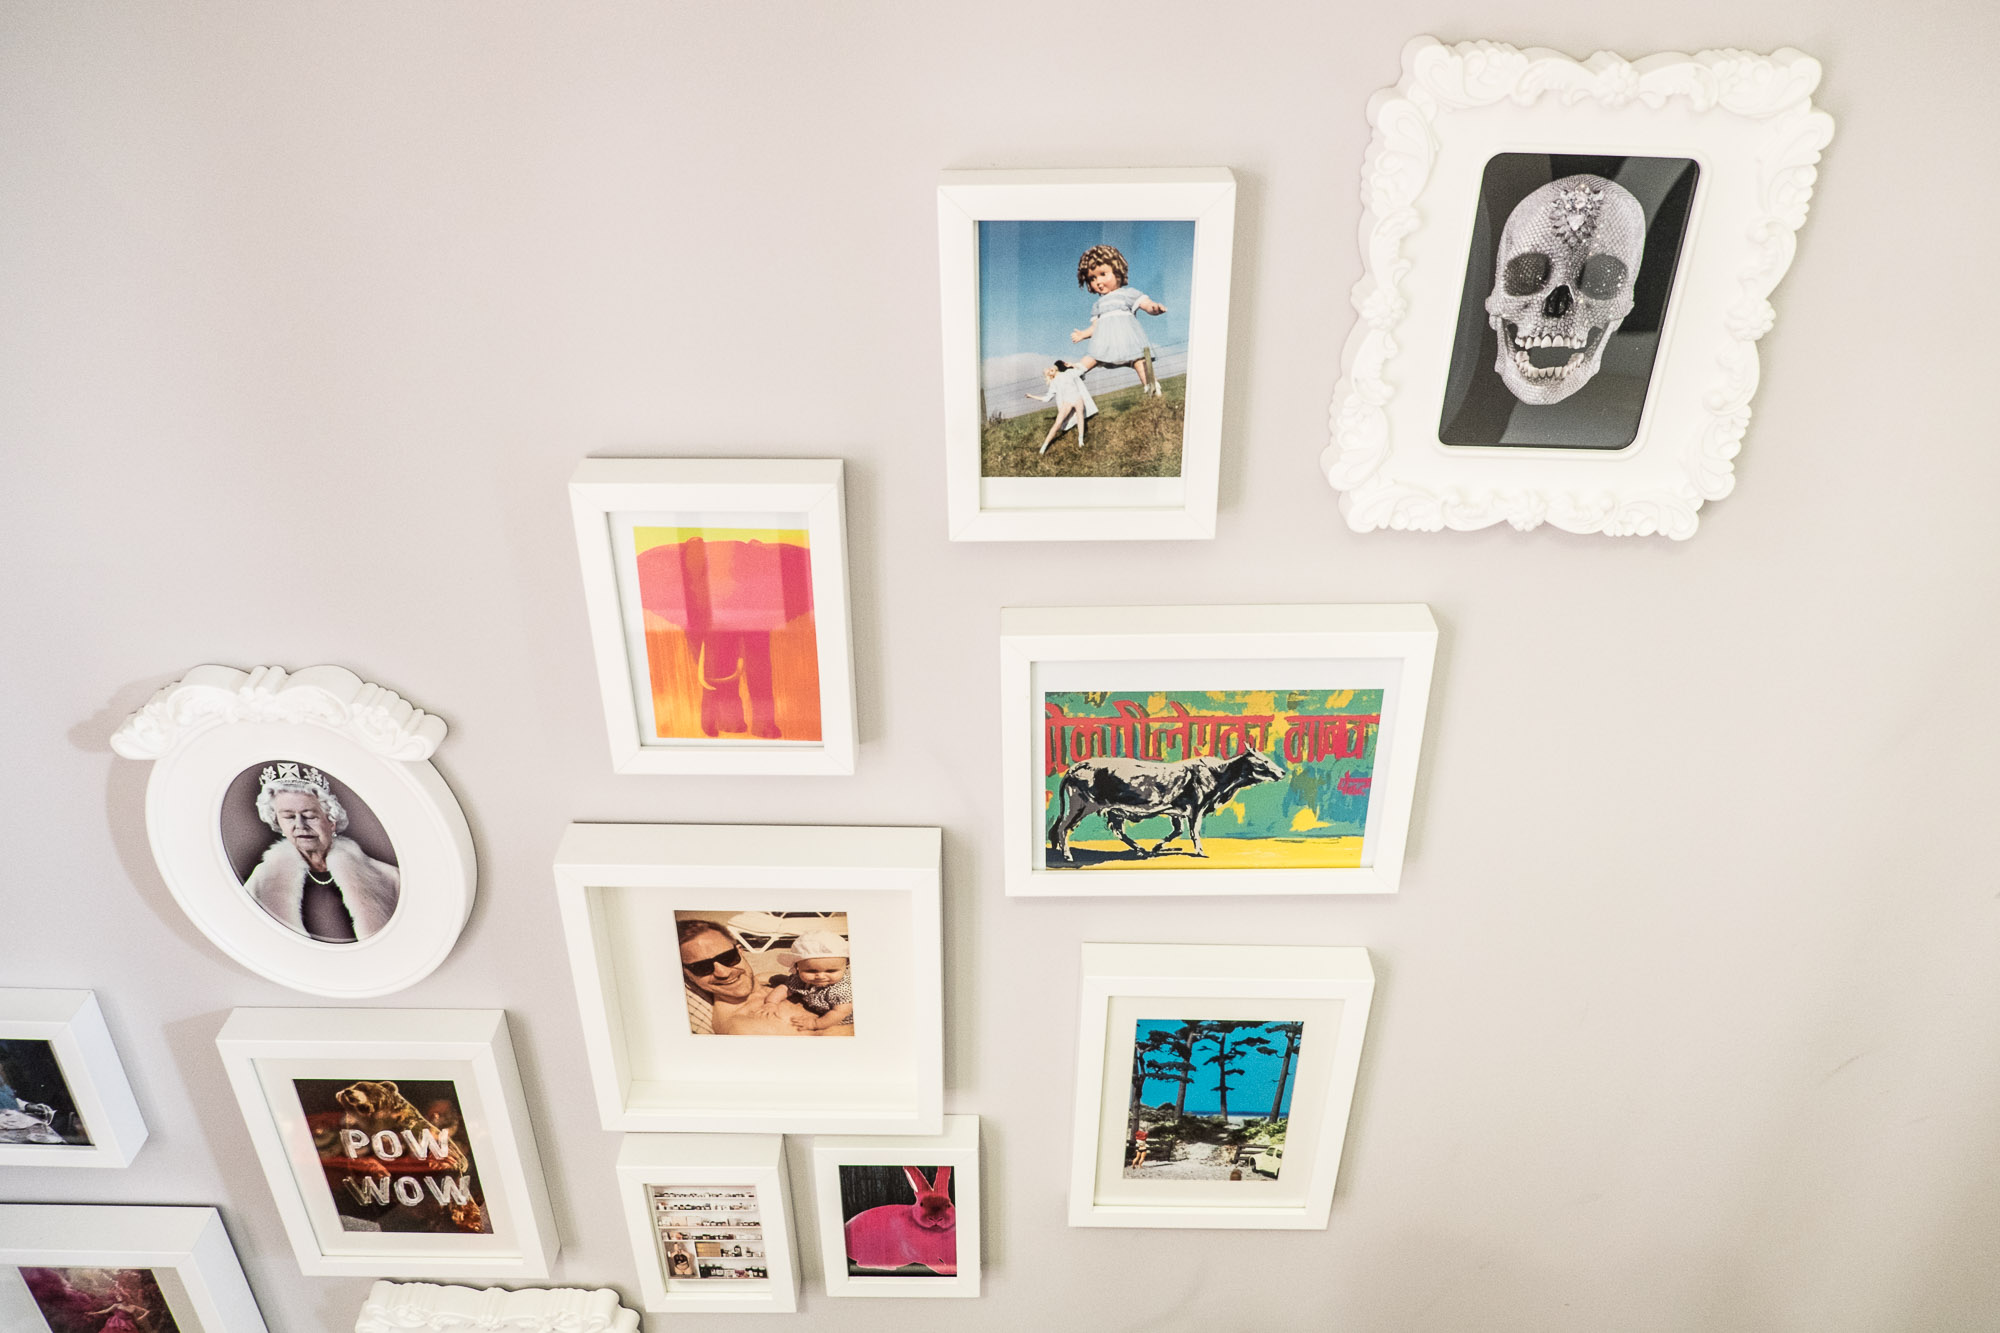 3. Turn your staircase into a gallery 